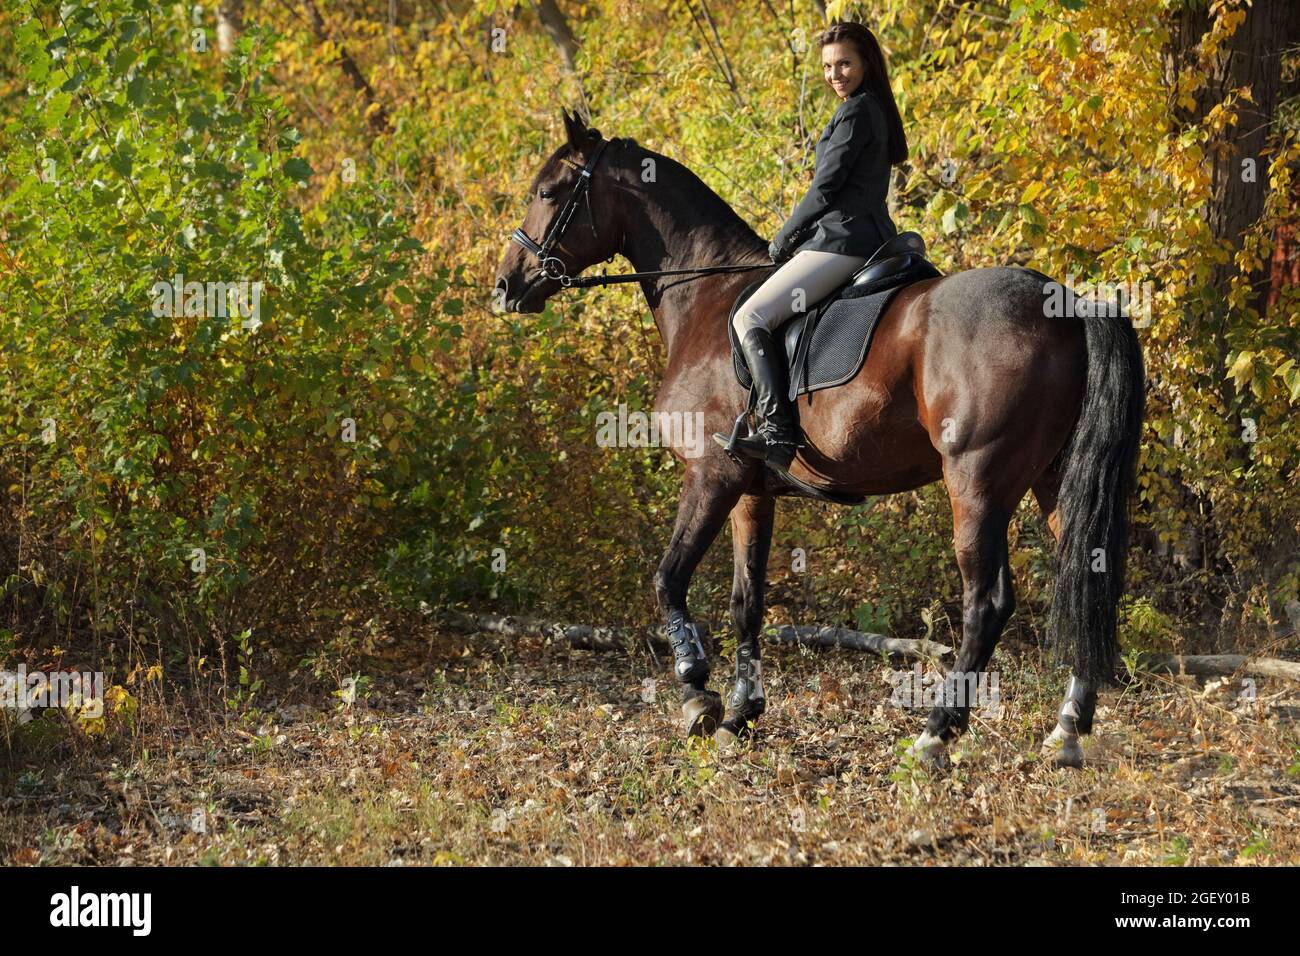 Equestrian model girl riding sportive dressage horse in autumn forest Stock Photo